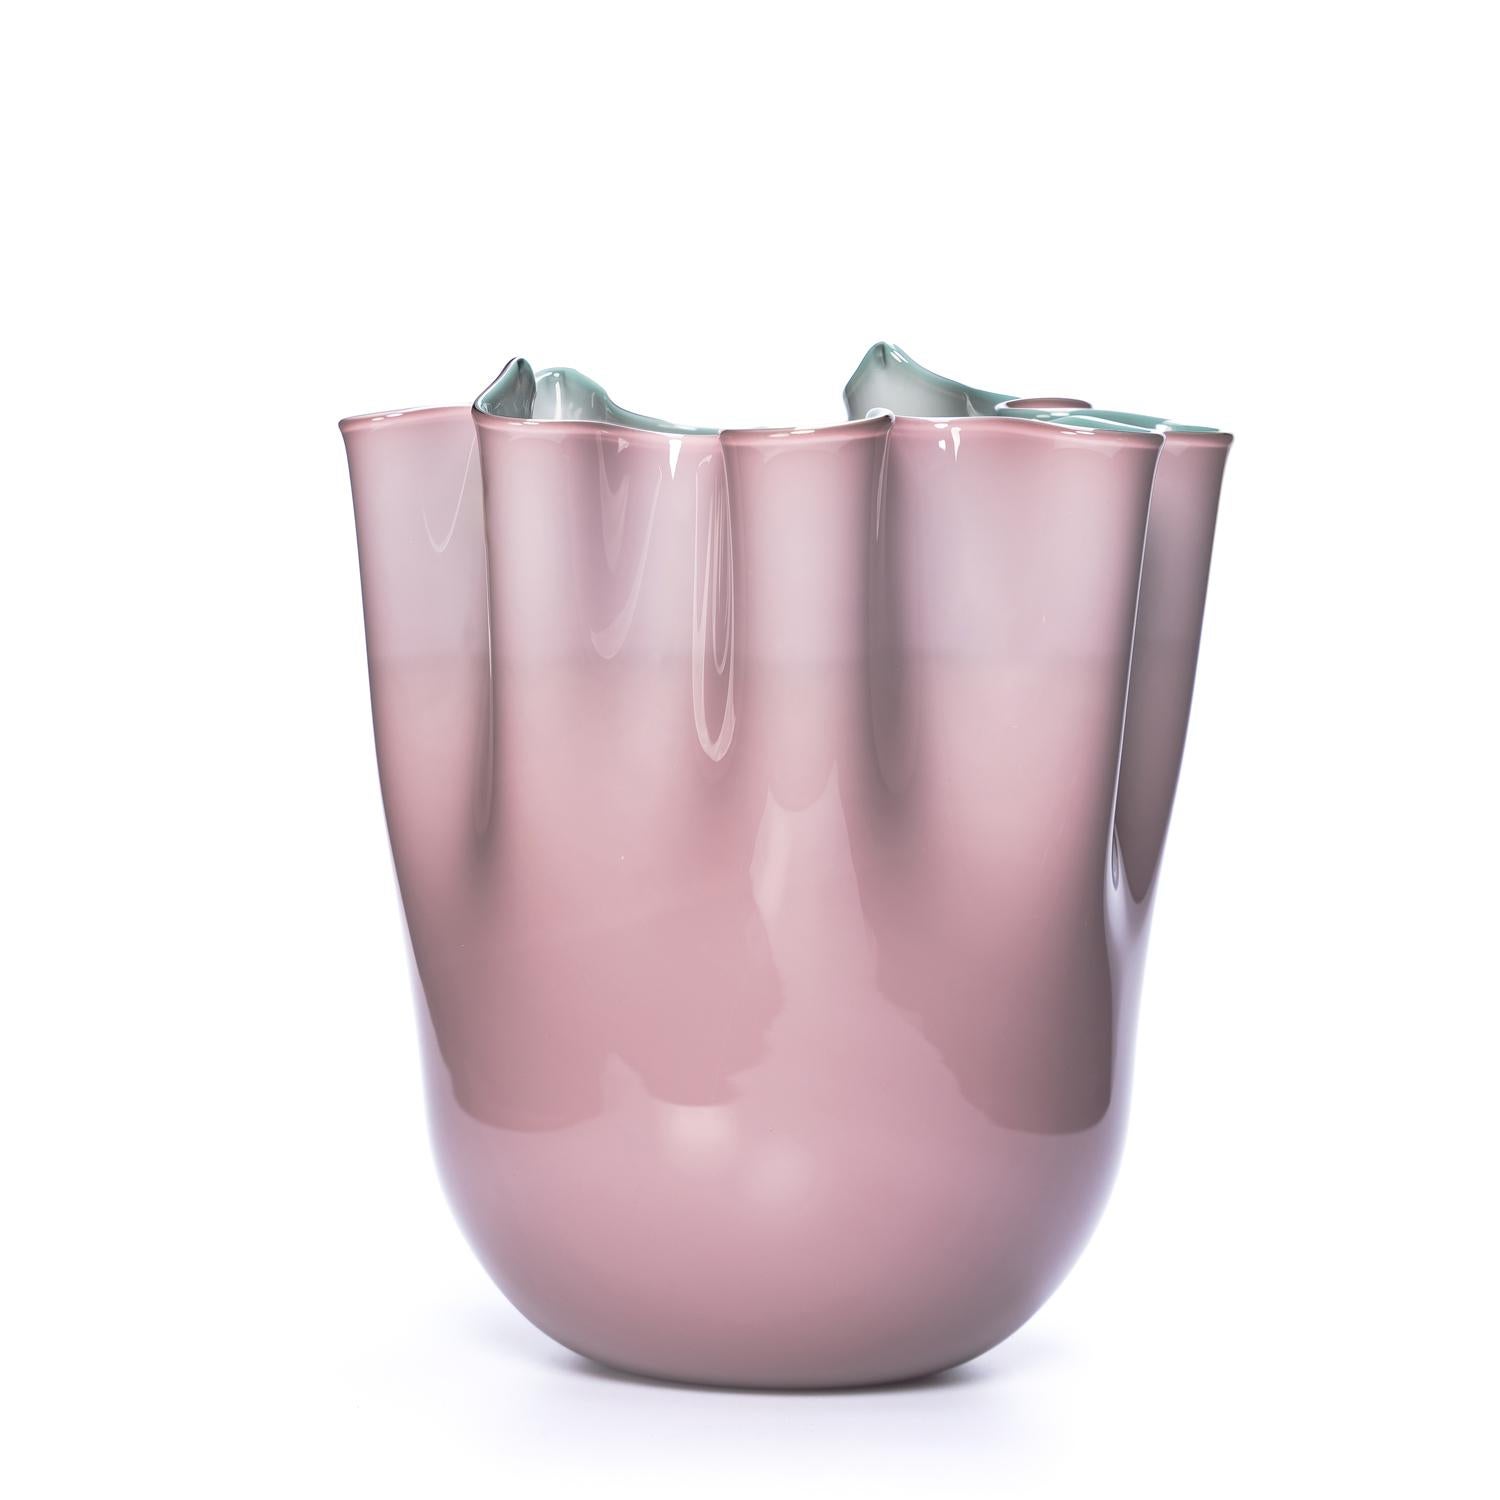 
We are thrilled to present our latest creation - a trio of exquisite Murano glass art vases, each embodying its own unique charm. Our goal is to evoke emotions through our art, and we take pride in introducing these stunning vases that are sure to